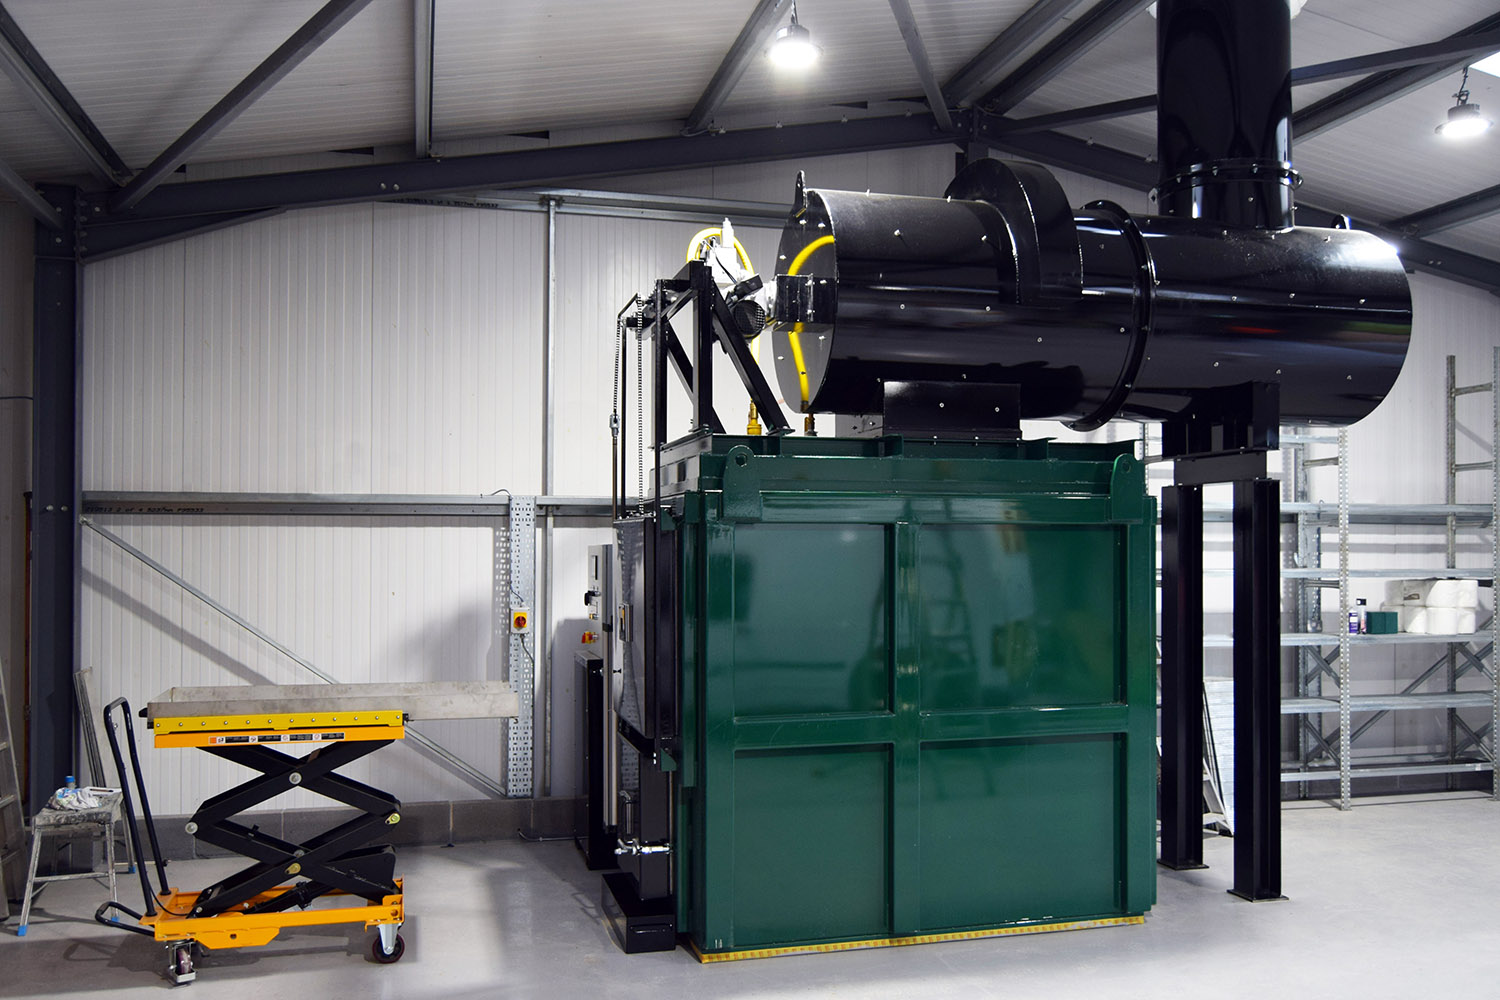 A pet crematorium with a hydraulic lifting table